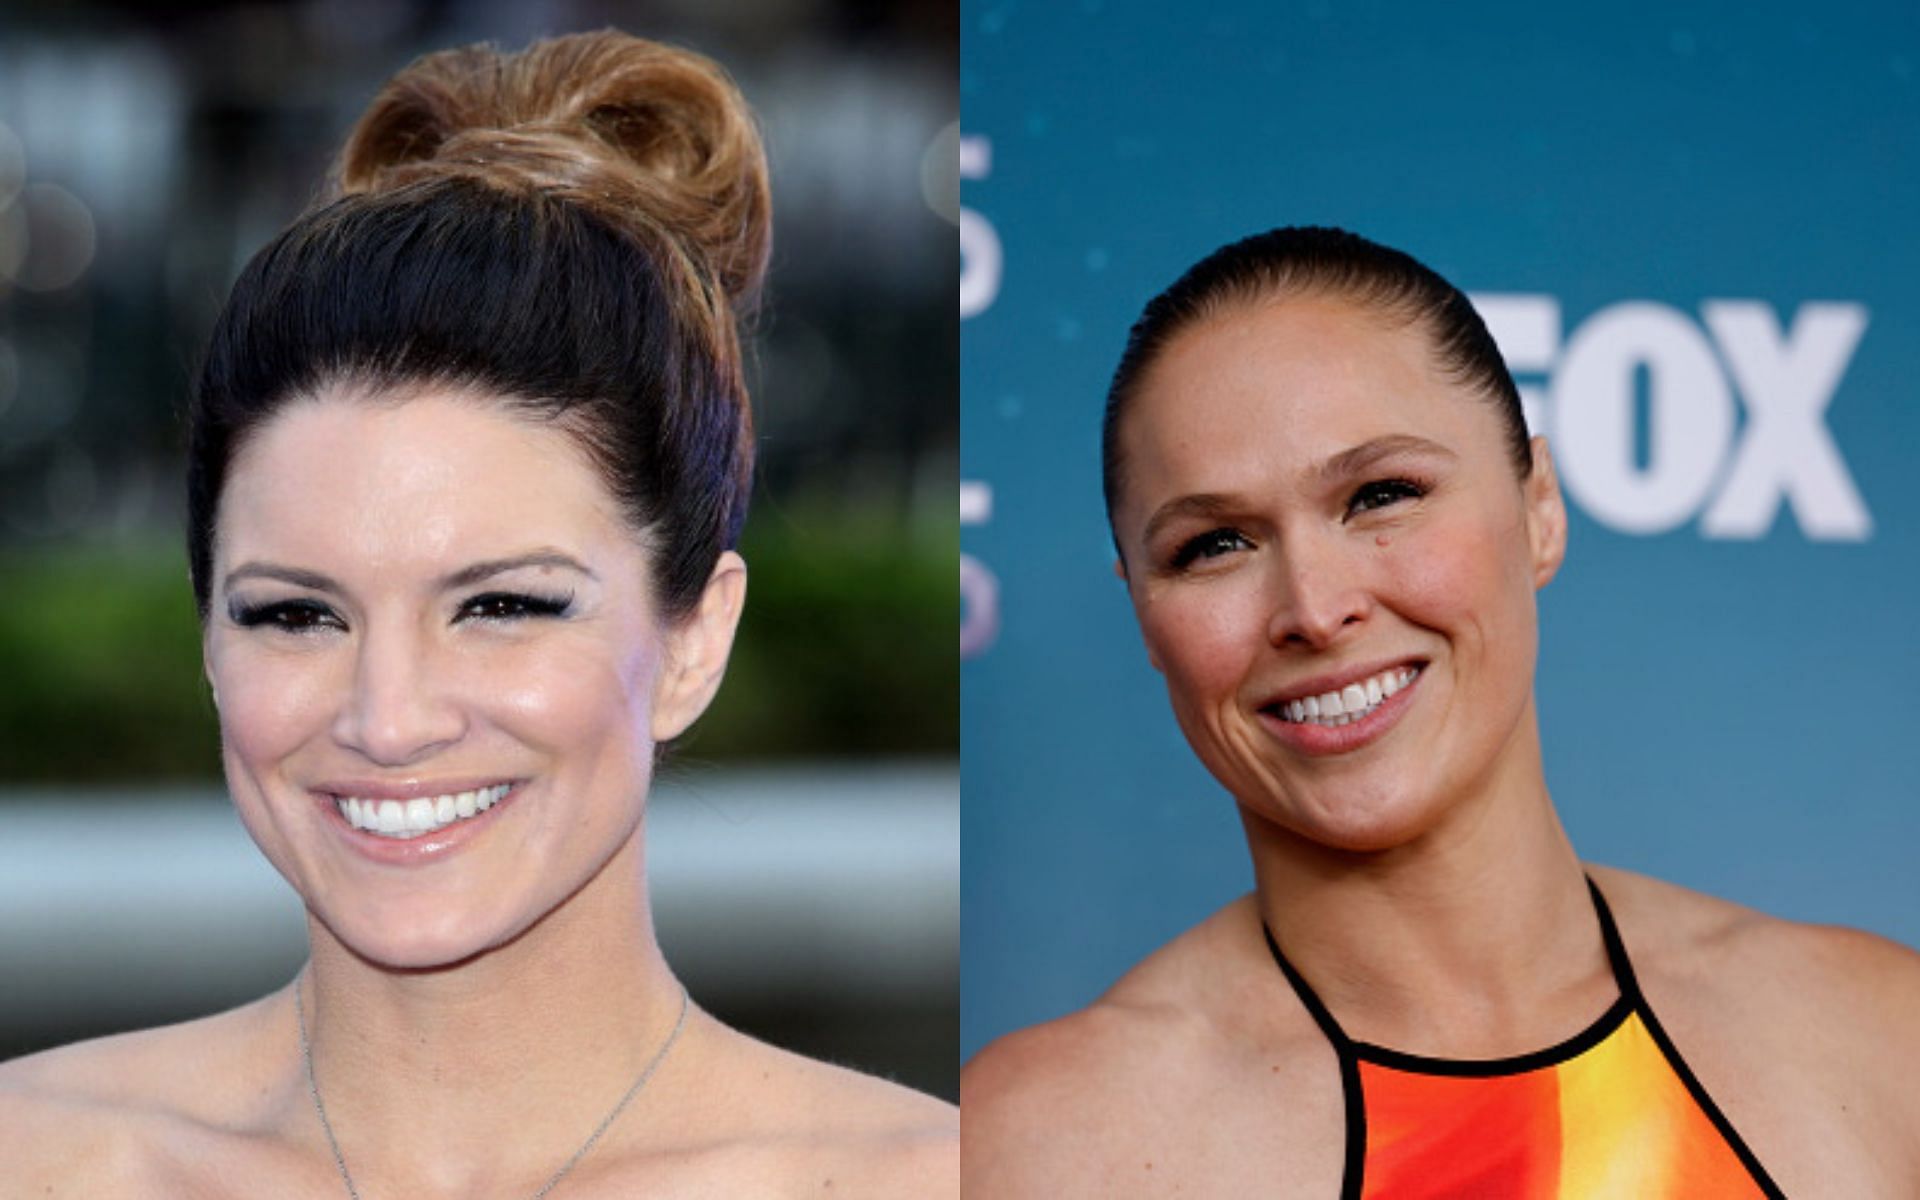 Gina Carano weighs in on potential Ronda Rousey bout